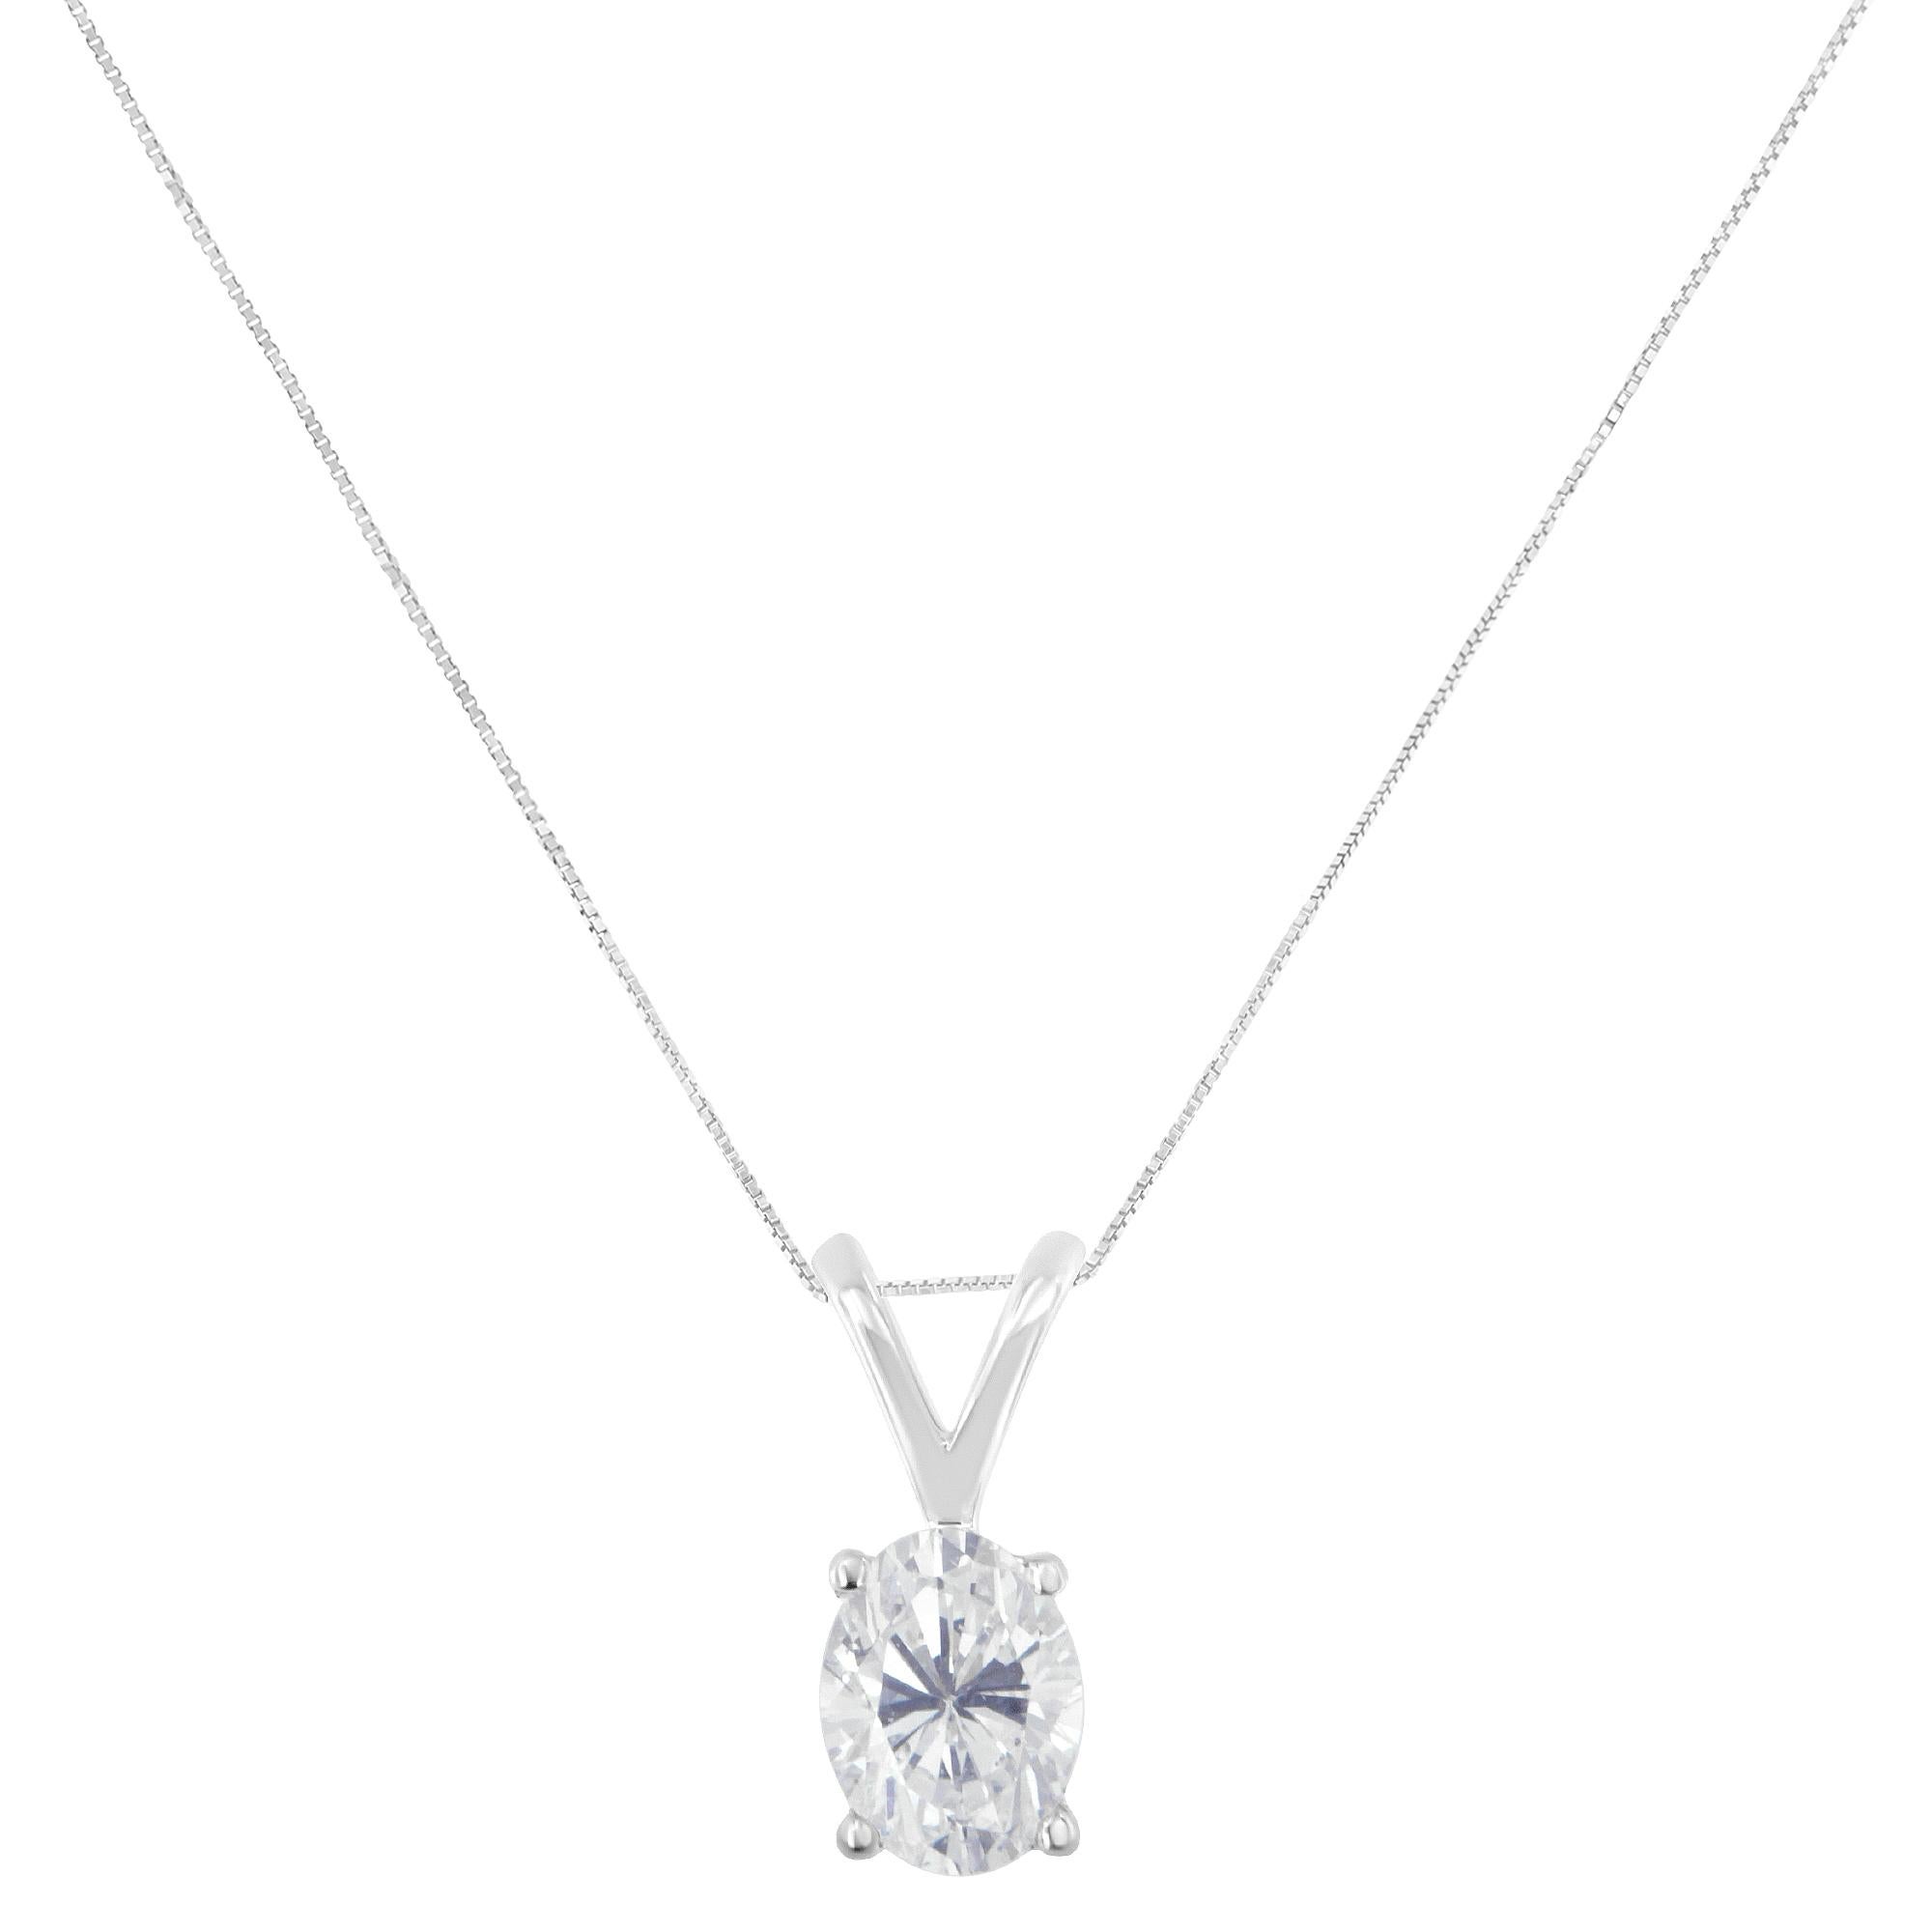 Elevate your style with the timeless allure of this exquisite pendant necklace, certified by IGI. Featuring a stunning 3/8 carat oval-cut diamond delicately cradled in a classic four-prong setting, this piece exudes sophistication. Crafted from